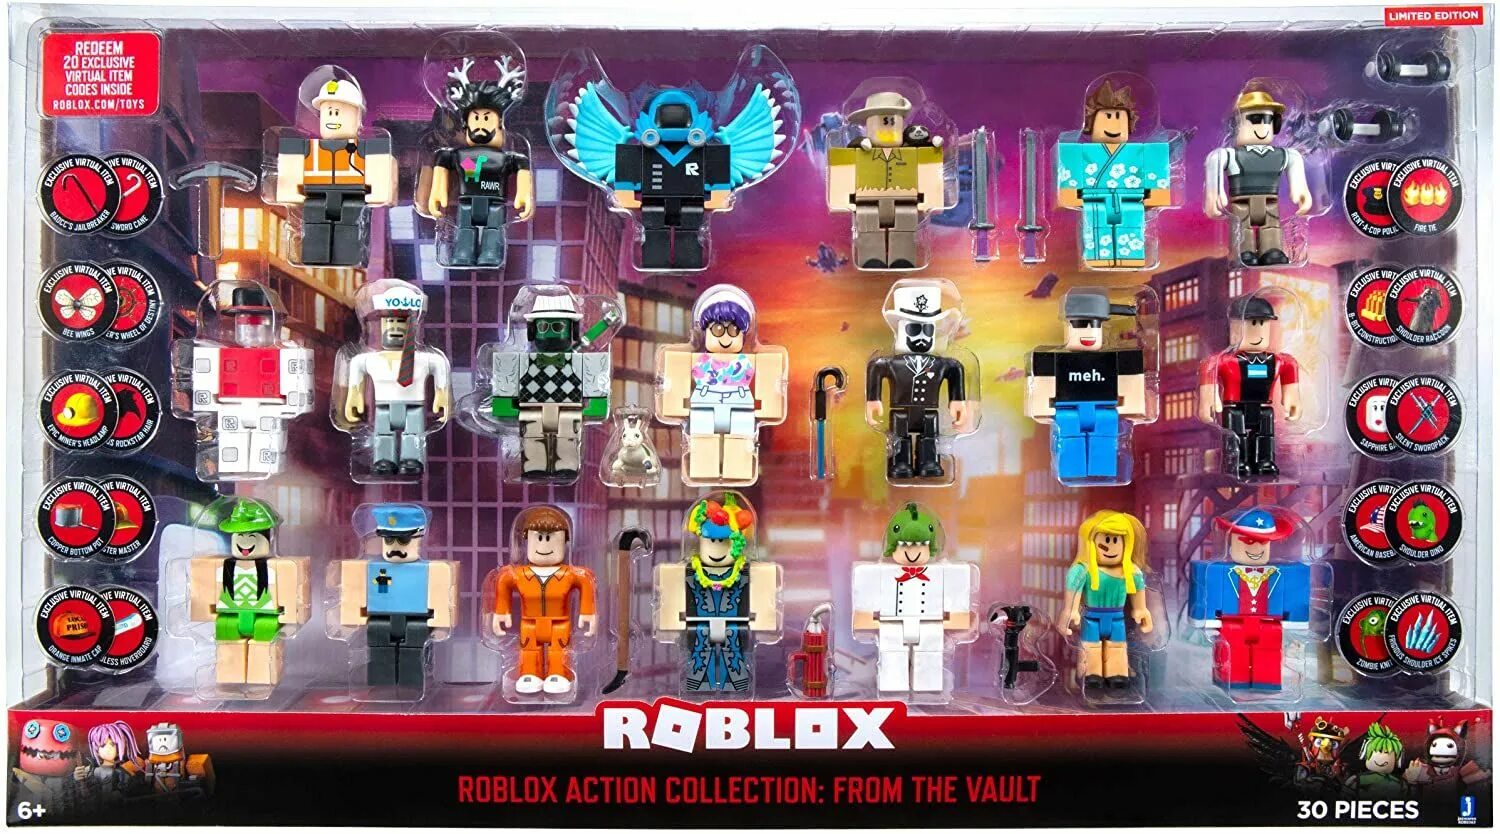 Roblox купить роблоксы. Roblox Action collection: from the Vault 20 Figure Pack. Roblox Toys codes 2022. Сапфир игрушка РОБЛОКС. Roblox Action collection from the Vault Limited Edition - New Sapphire gaze.